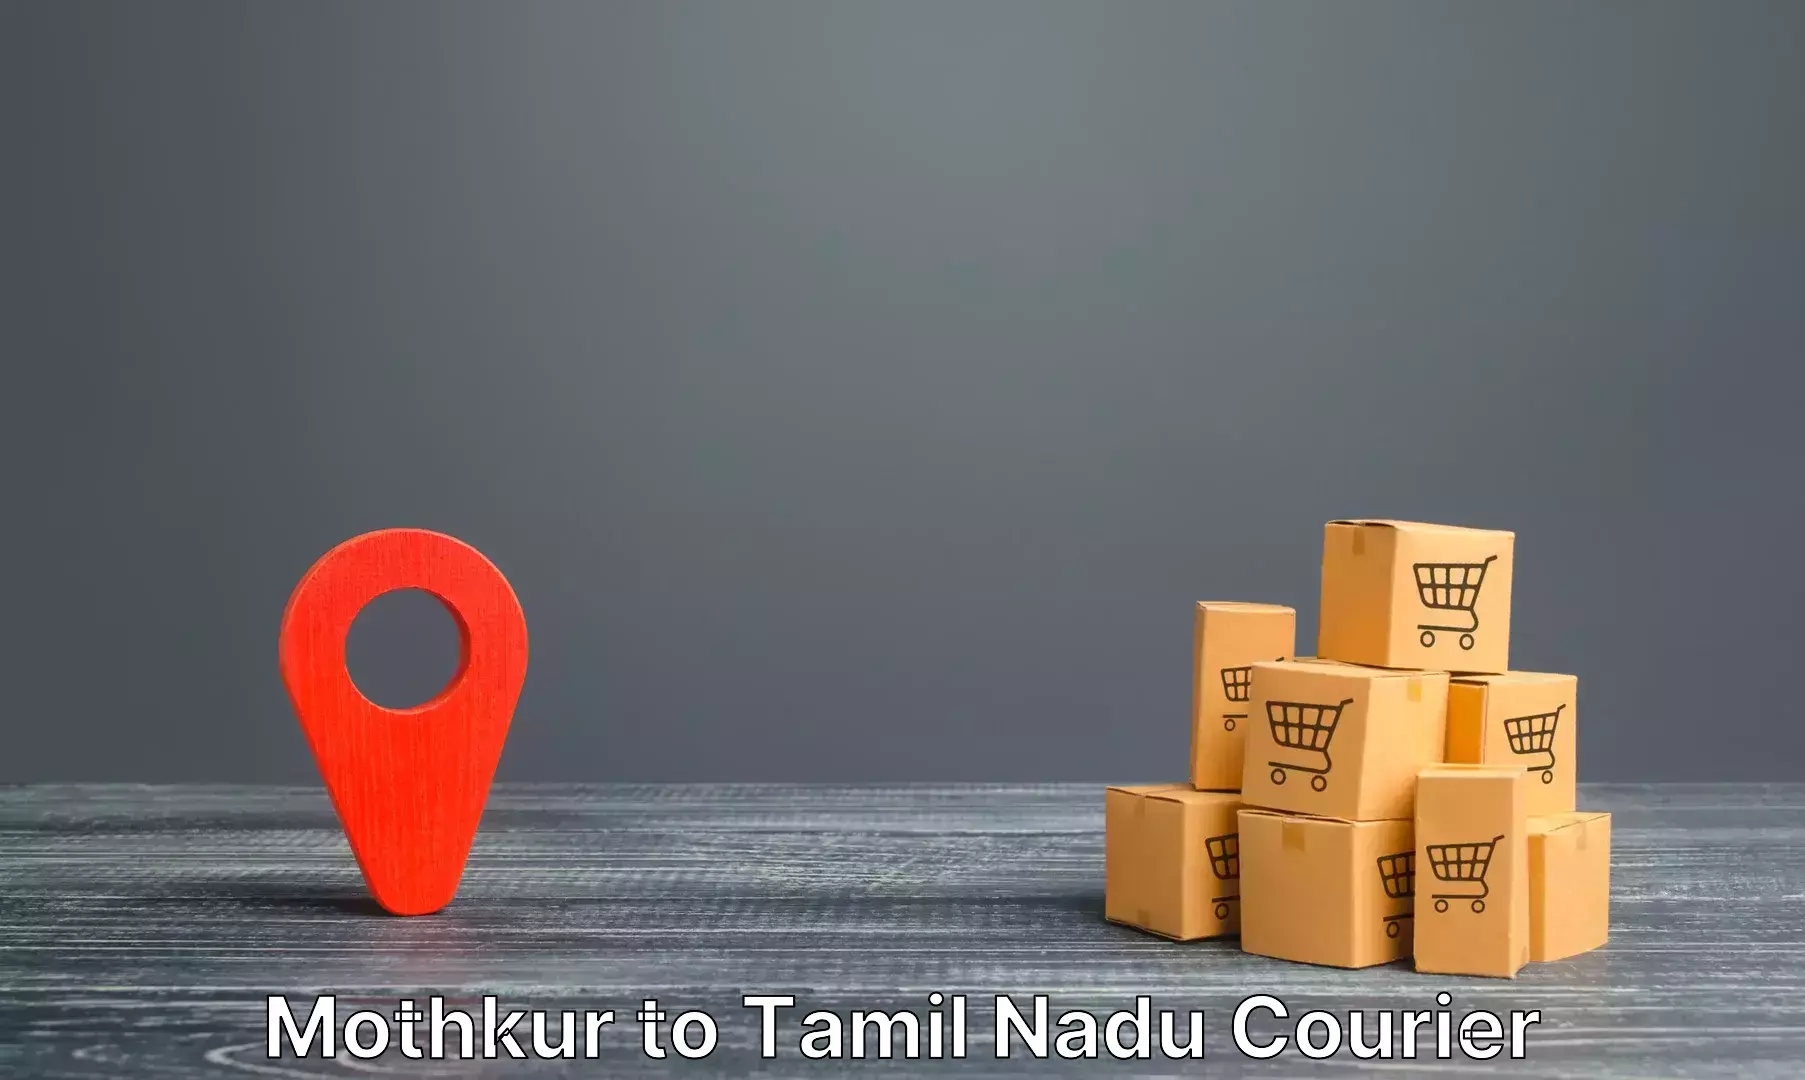 Luggage delivery network Mothkur to Tamil Nadu